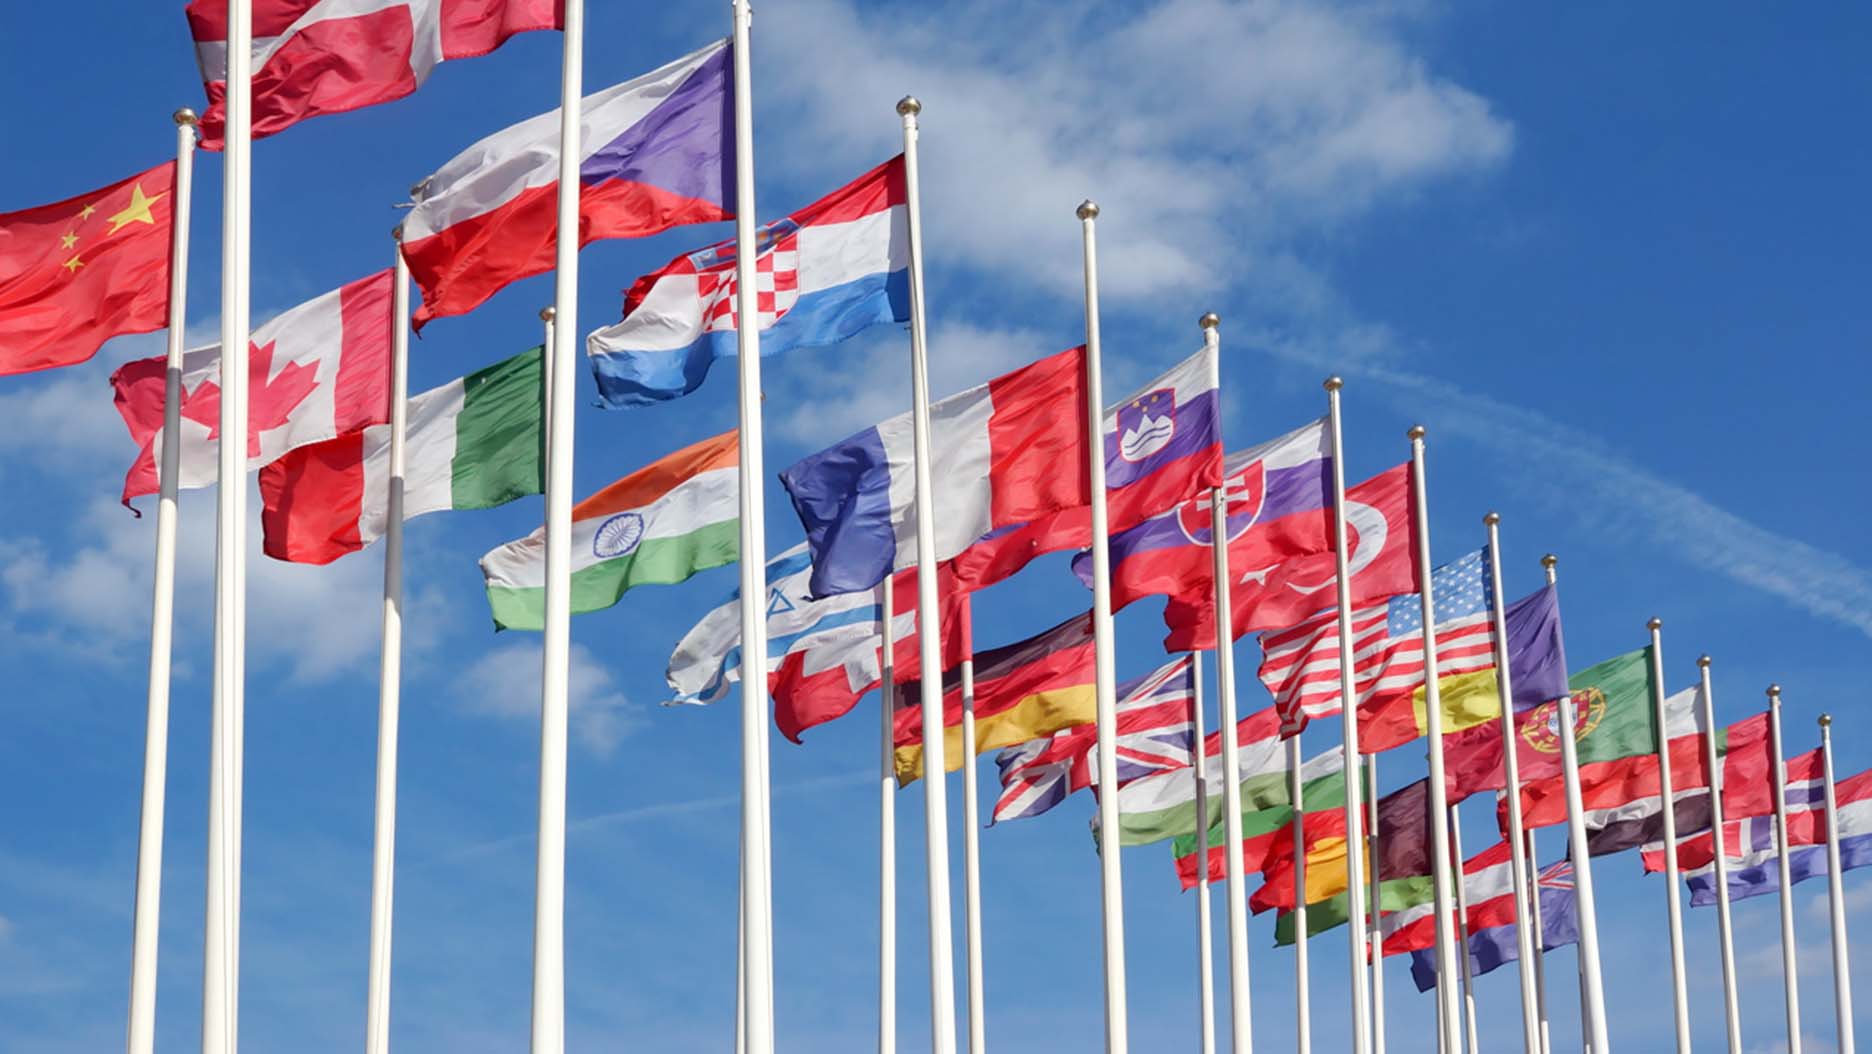 An array of flags from various countries, each positioned on its own flag pole. They stand in front of a bright blue sky.